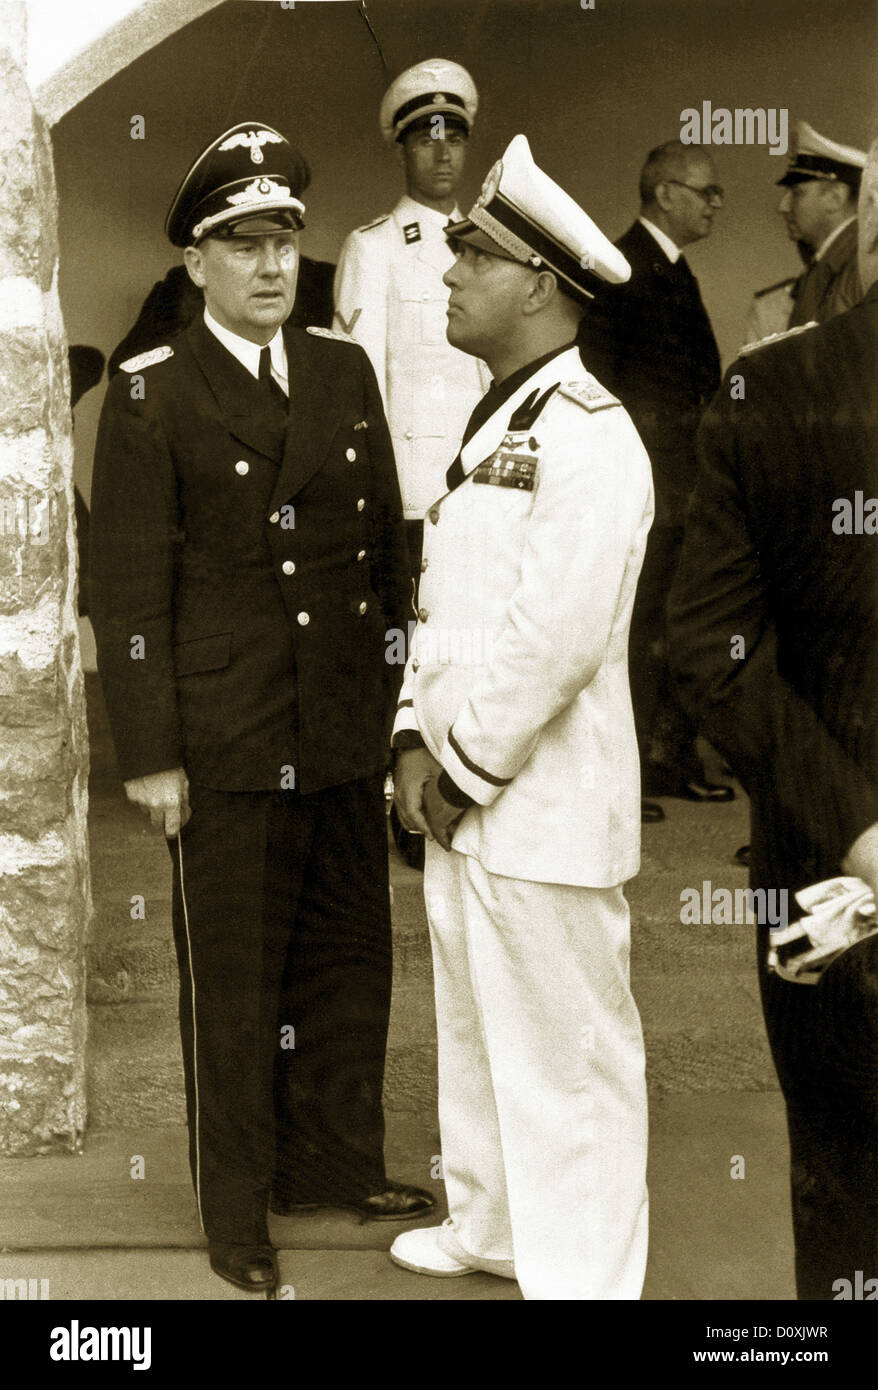 Count, Galeazzo Ciano, Italian, Foreign Minister, visiting, Berghof, interpreter, Paul Schmidt, Berchtesgaden, Germany, 1939, Wo Stock Photo